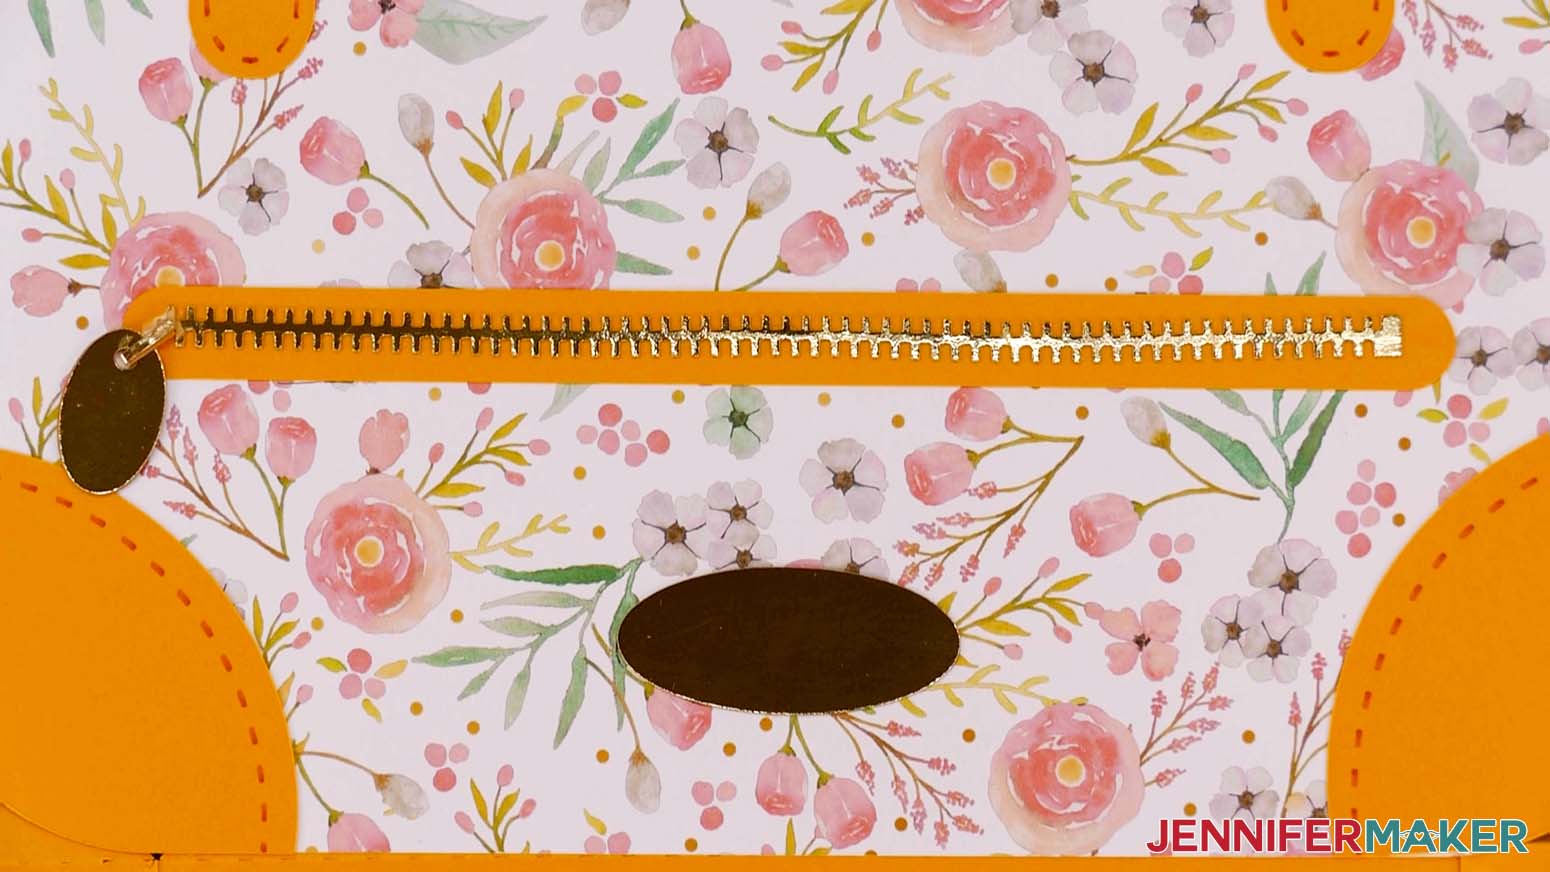 A closeup photo showing the zipper piece with zipper pull attached to the left end on the Flower Power paper handbag